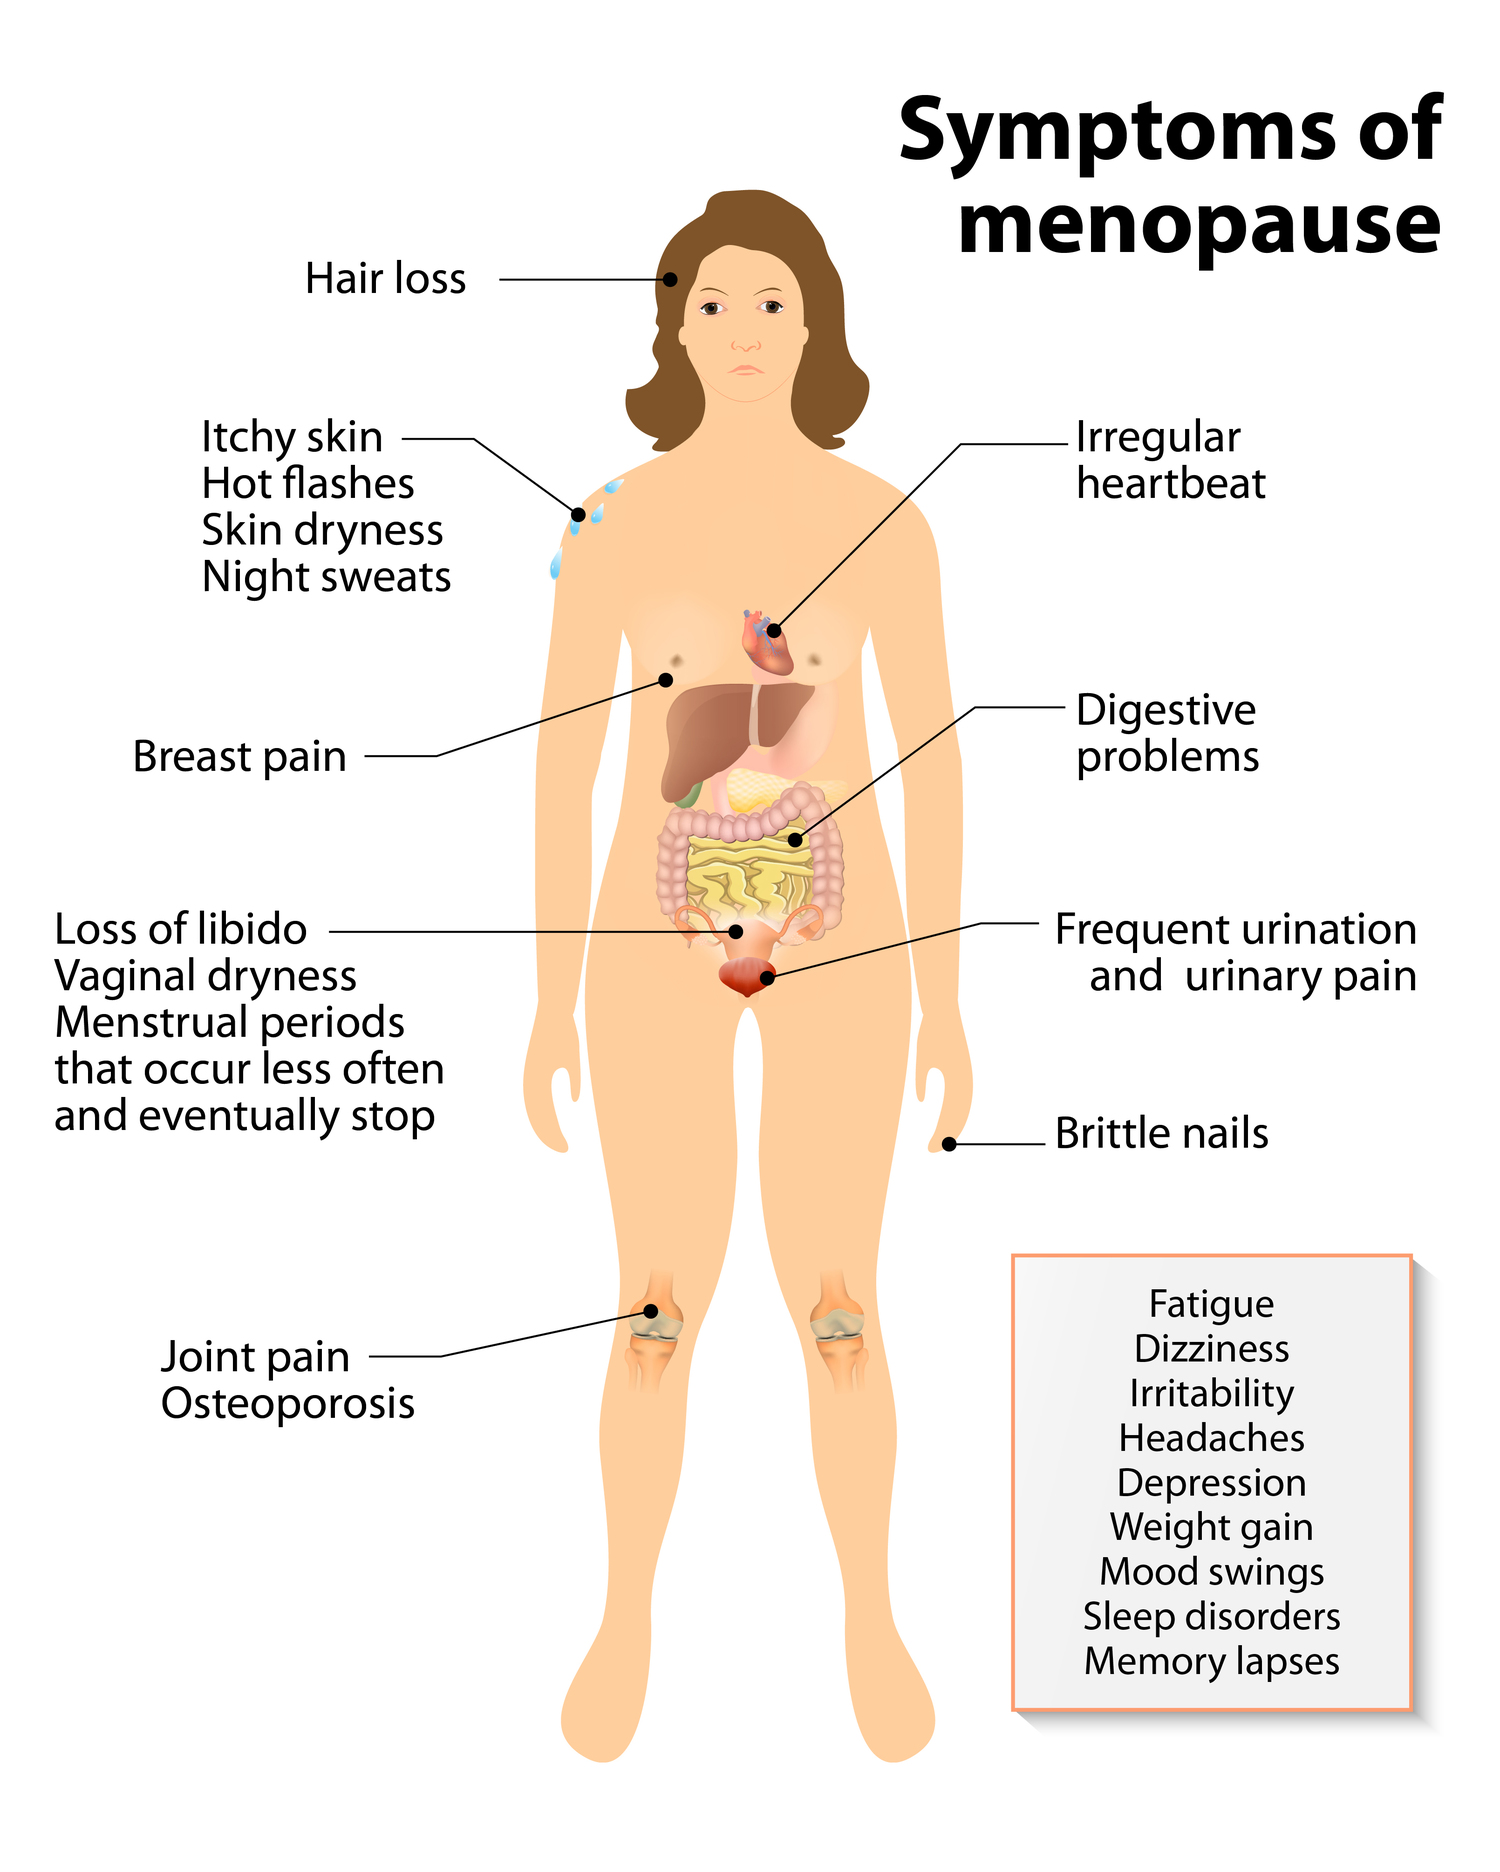 woonadres atomair Geweldig Symptoms of Menopause: Hot Flashes and Night Sweats, How Long Will They  Last? — Colorado Optimal Health